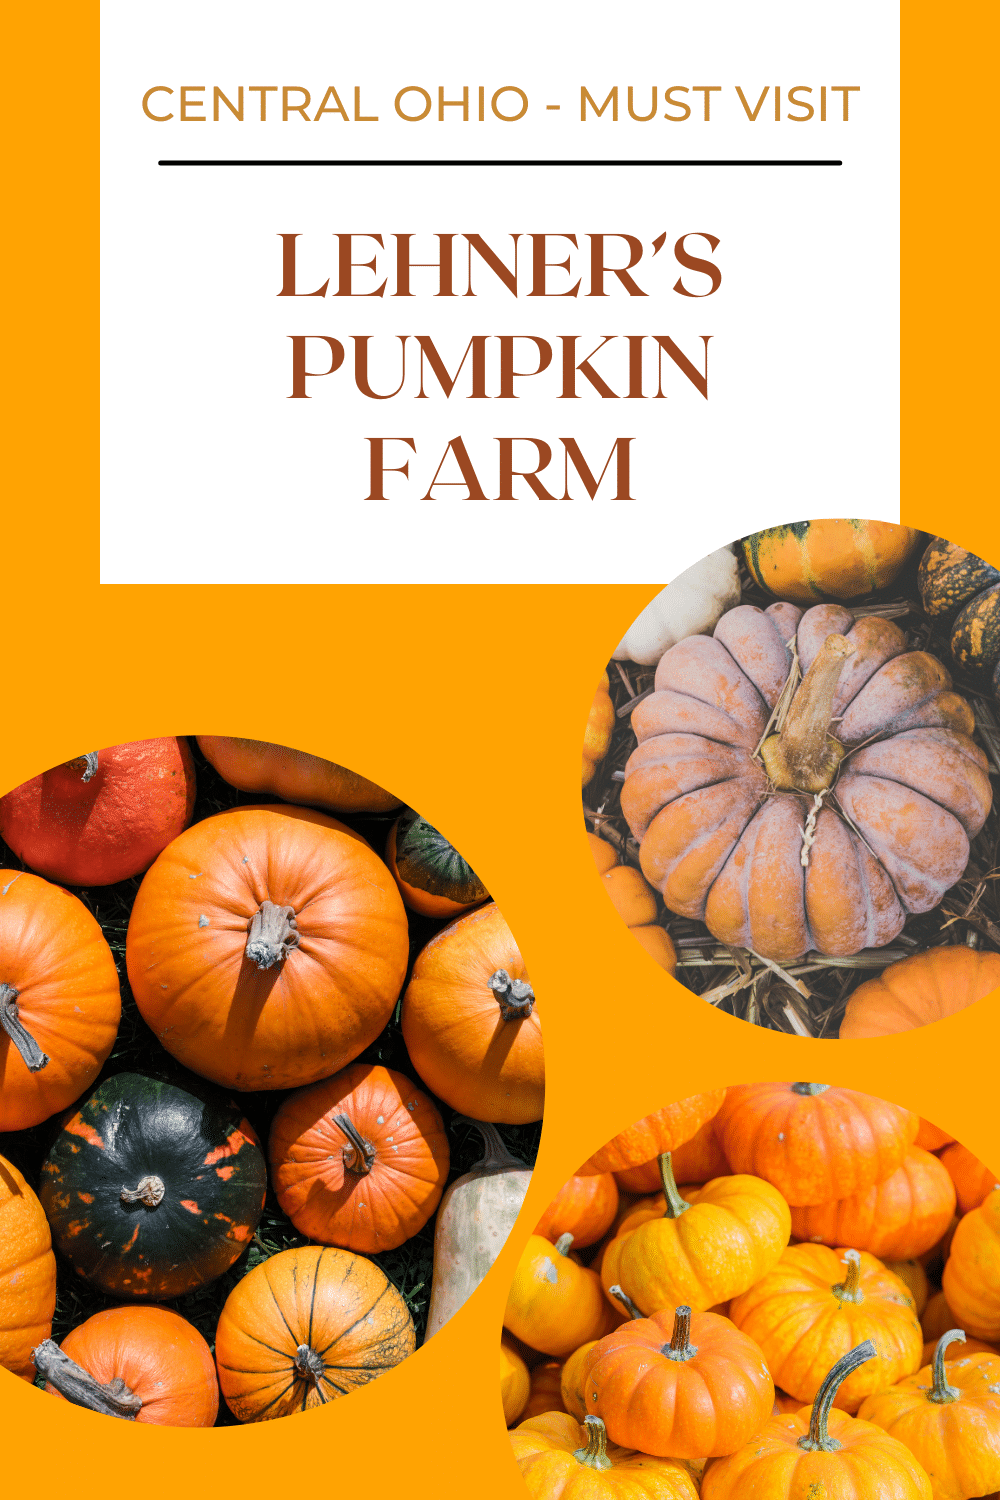 Lehner’s Pumpkin Farm is an ultra popular pumpkin farm, located in central Ohio. Lehner’s Pumpkin Farm offers up 30+ family friendly activities, food and more in addition to you pick pumpkins. #ohio #centralohio #ohiopumpkins